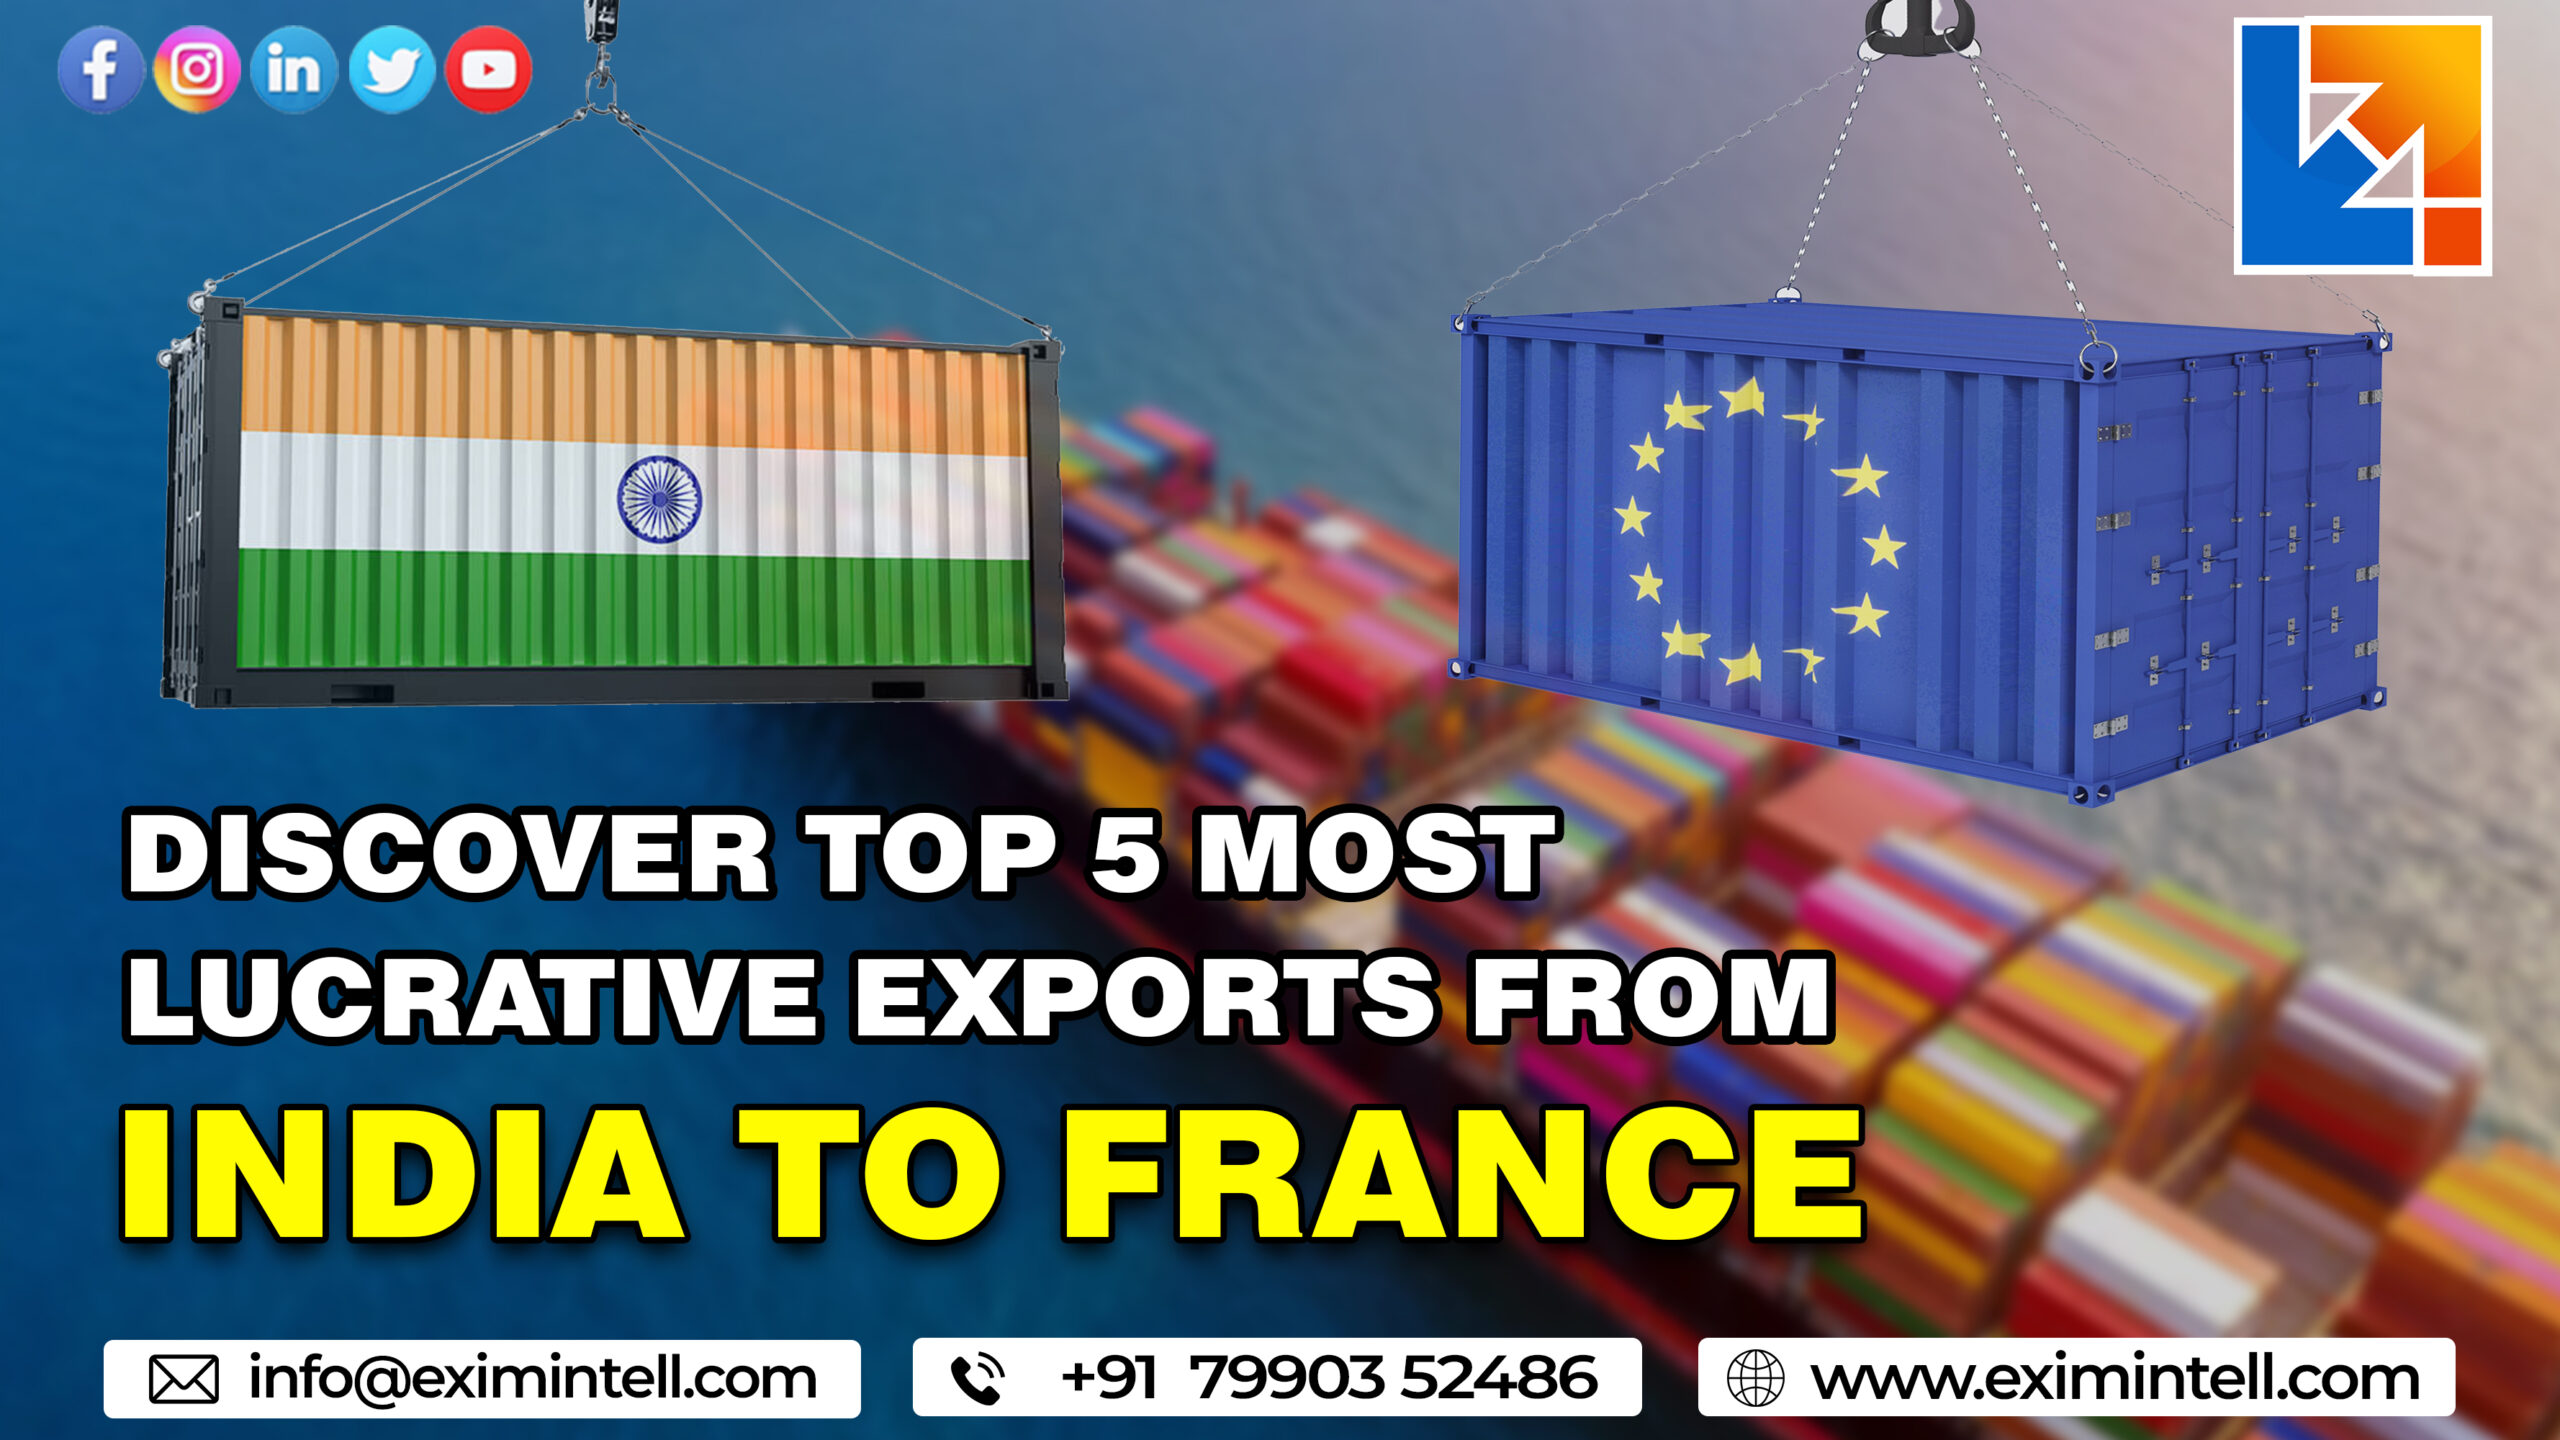 Discover Top 5 Most Lucrative Exports from India to France